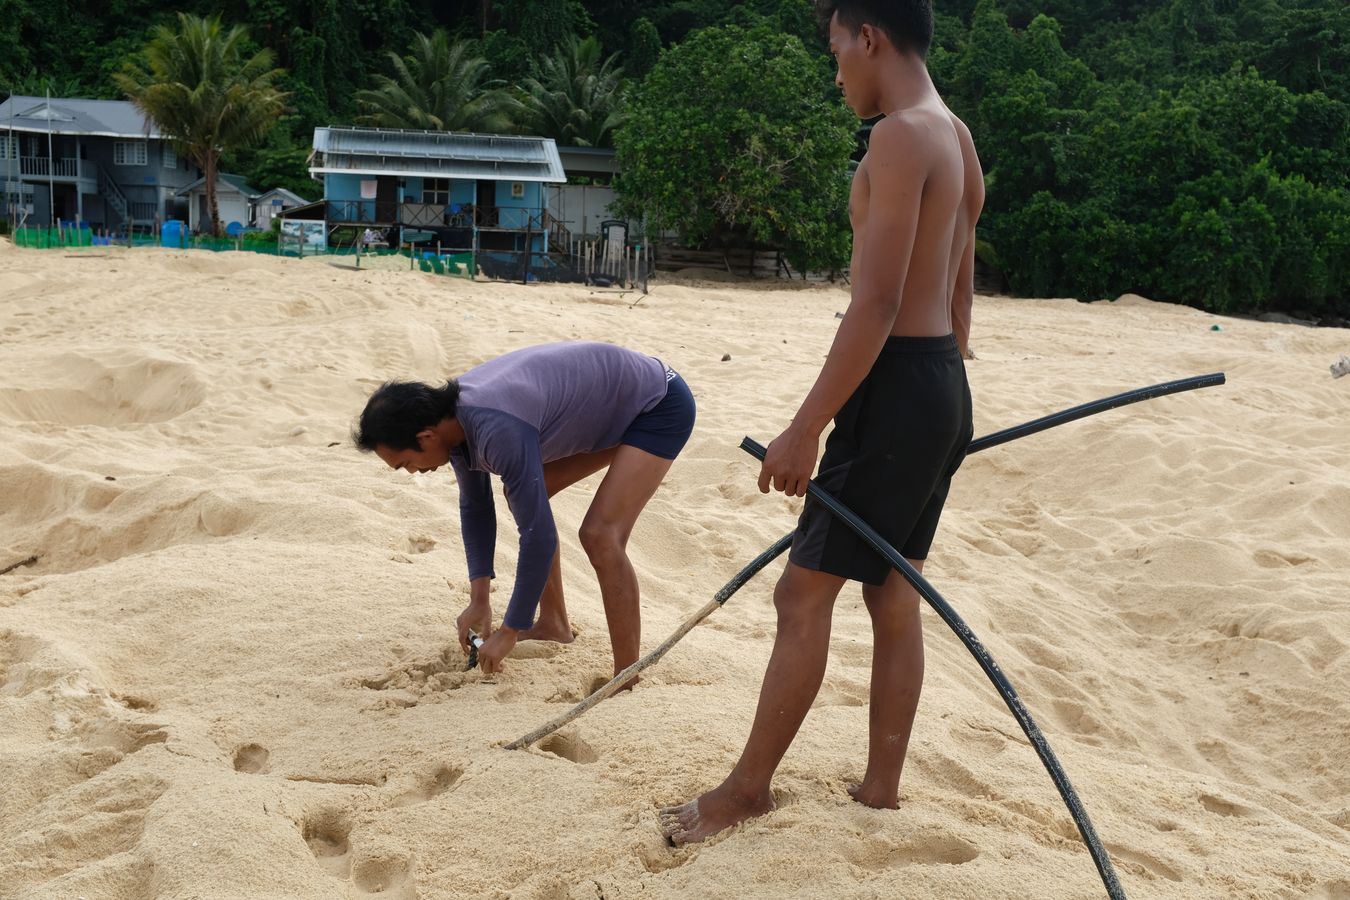 Early in the morning a ranger uses the tool to find the exact location of the sea turtle nest, while his assistant watches and waits with plastic tubes to mark the nest once it is found. 